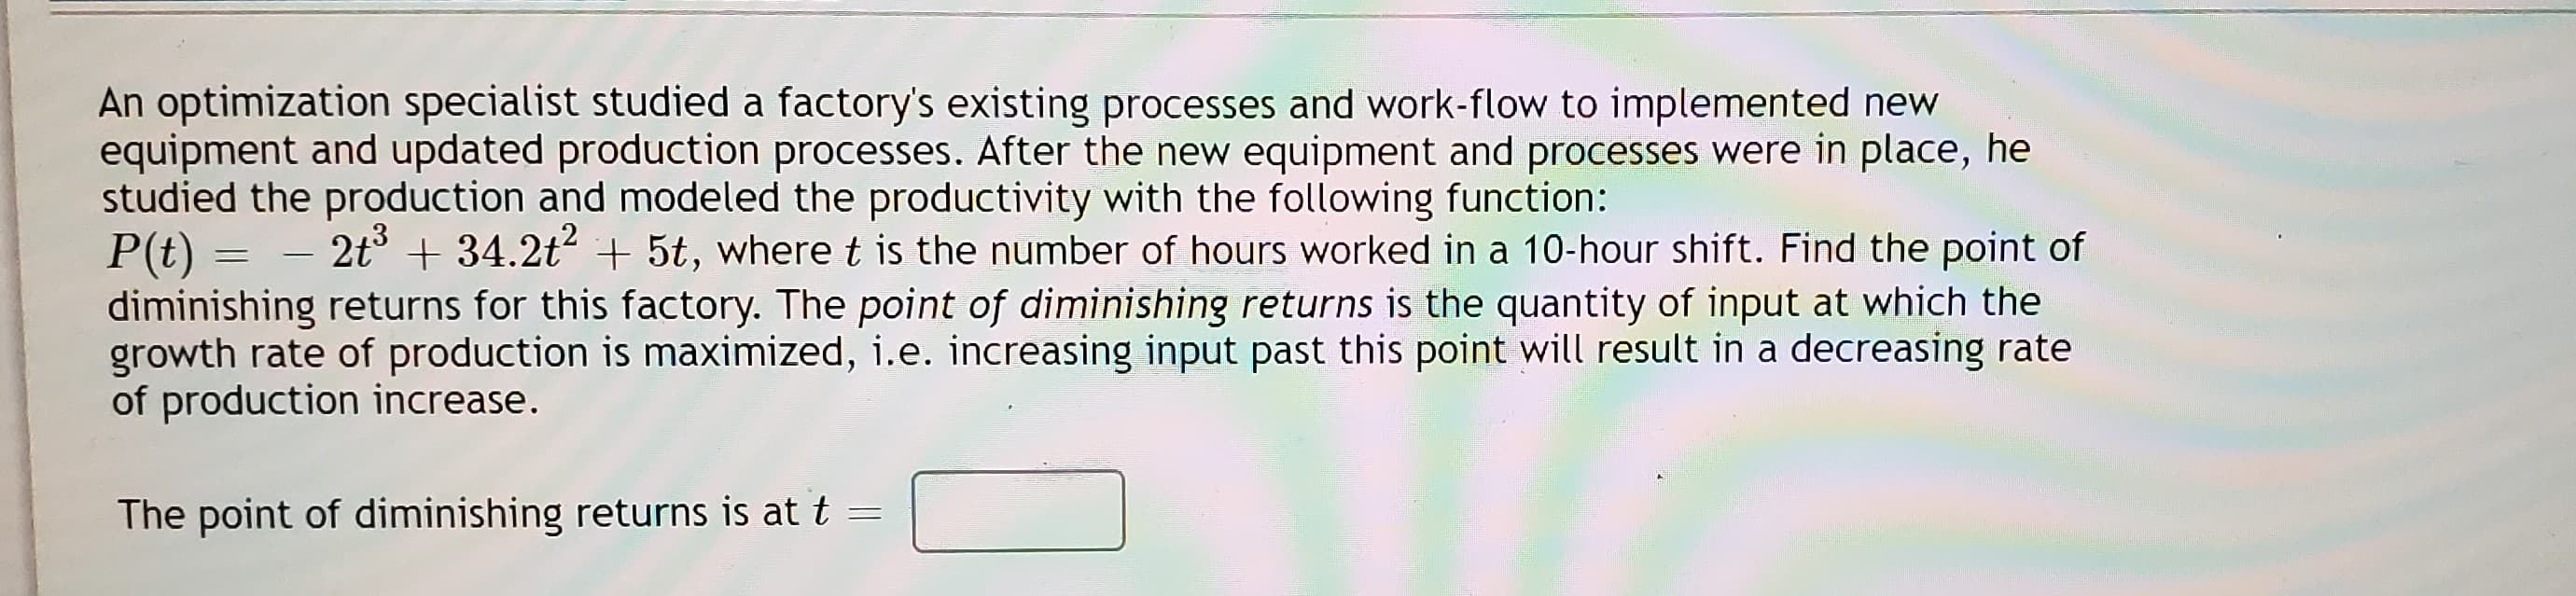 An optimization specialist studied a factory's existing processes and work-flow to implemented new
equipment and updated production processes. After the new equipment and processes were in place, he
studied the production and modeled the productivity with the following function:
P(t) =
diminishing returns for this factory. The point of diminishing returns is the quantity of input at which the
growth rate of production is maximized, i.e. increasing input past this point will result in a decreasing rate
of production increase.
2t° + 34.2t2 + 5t, where t is the number of hours worked in a 10-hour shift. Find the point of
The point of diminishing returns is at t =
